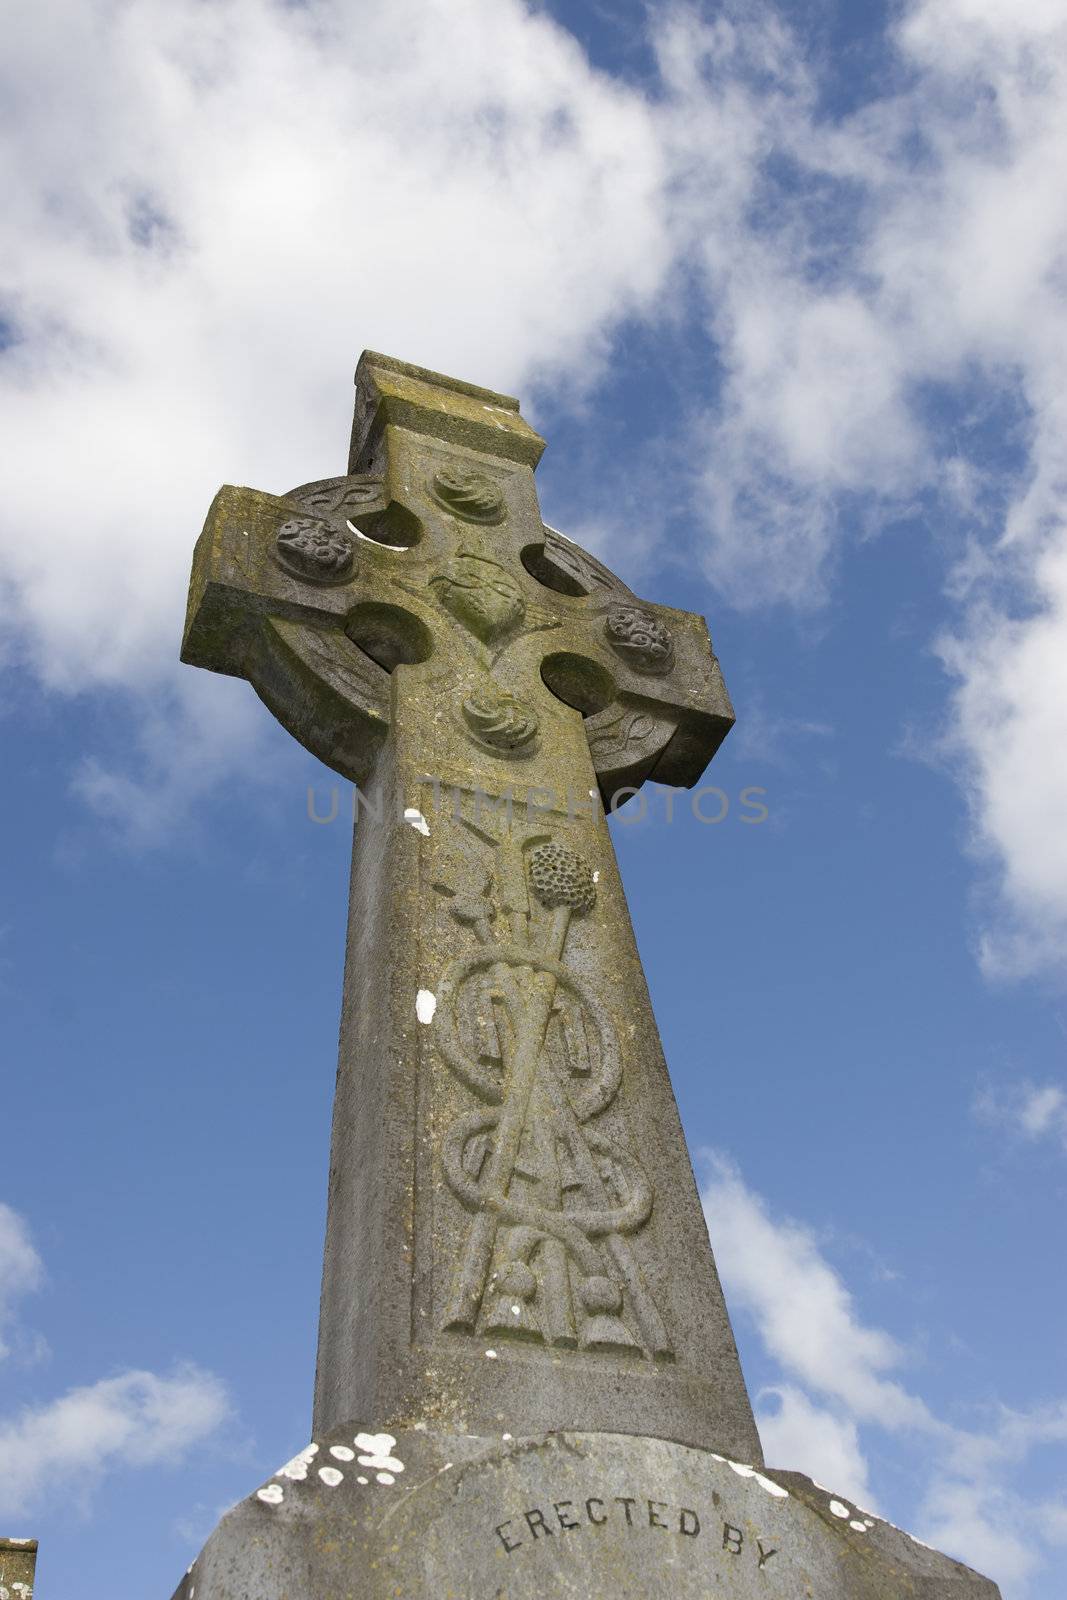 an old celtic cross in an irish graveyard with blue cloudy sky